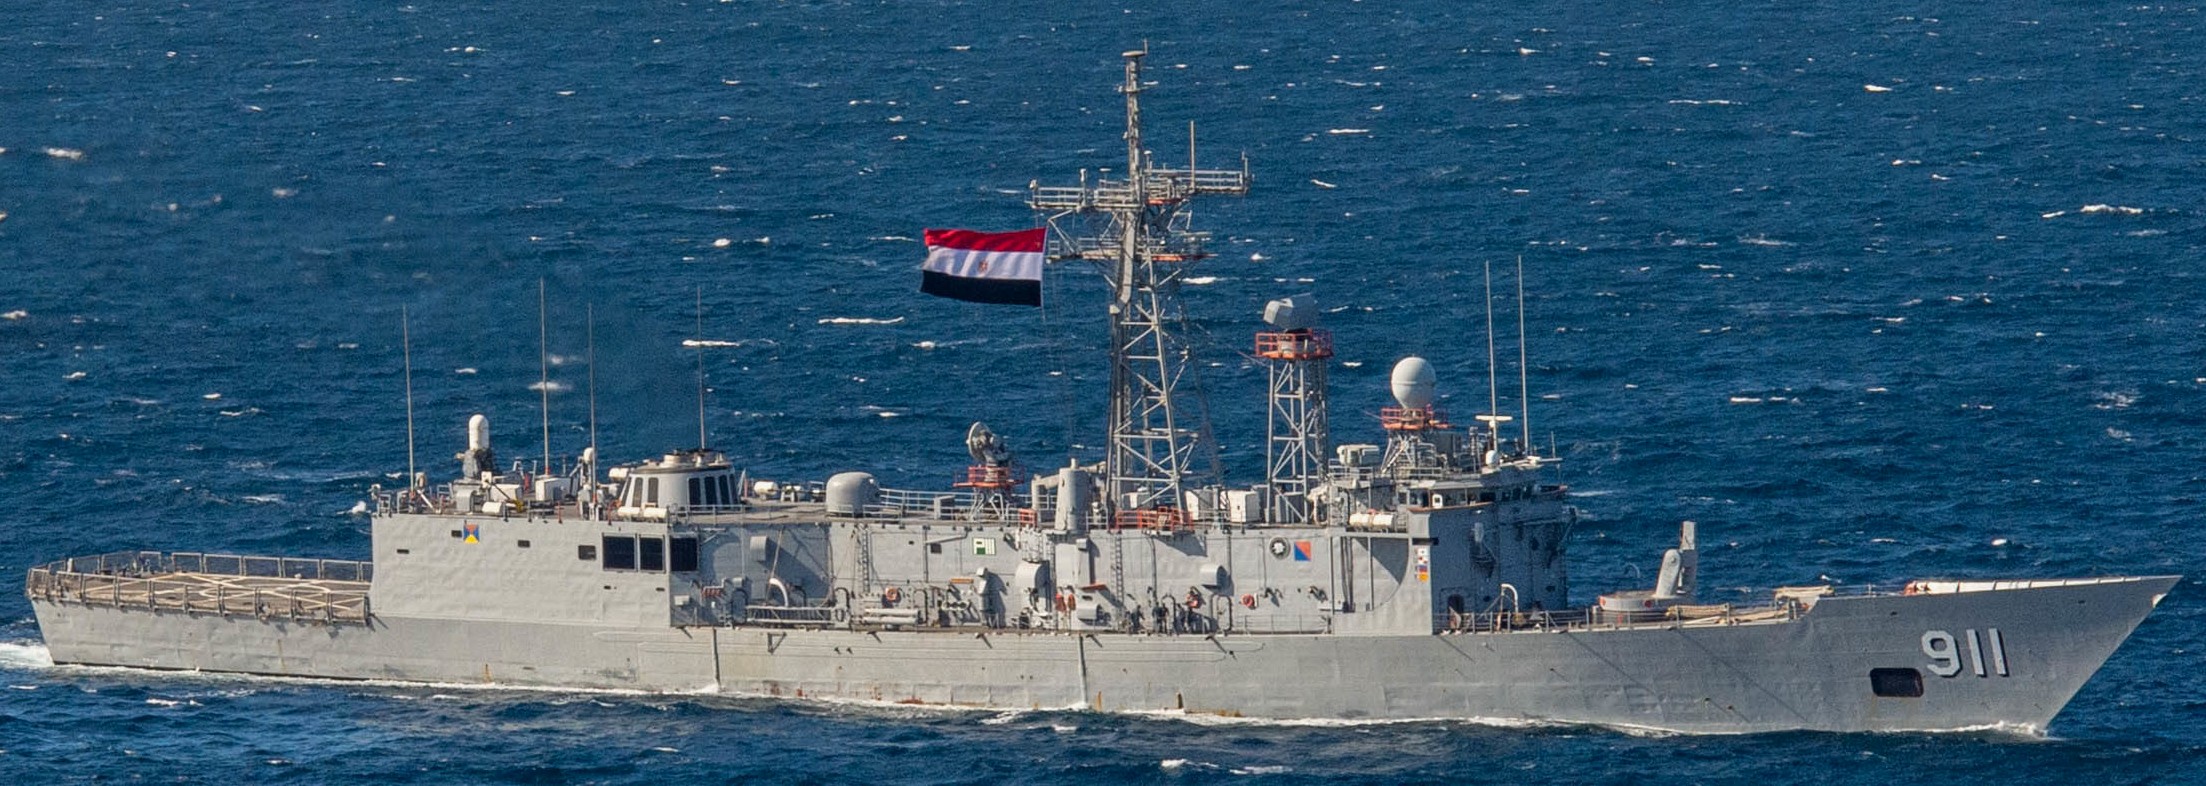 f-911 ens alexandria perry class frigate egyptian naval force navy 04